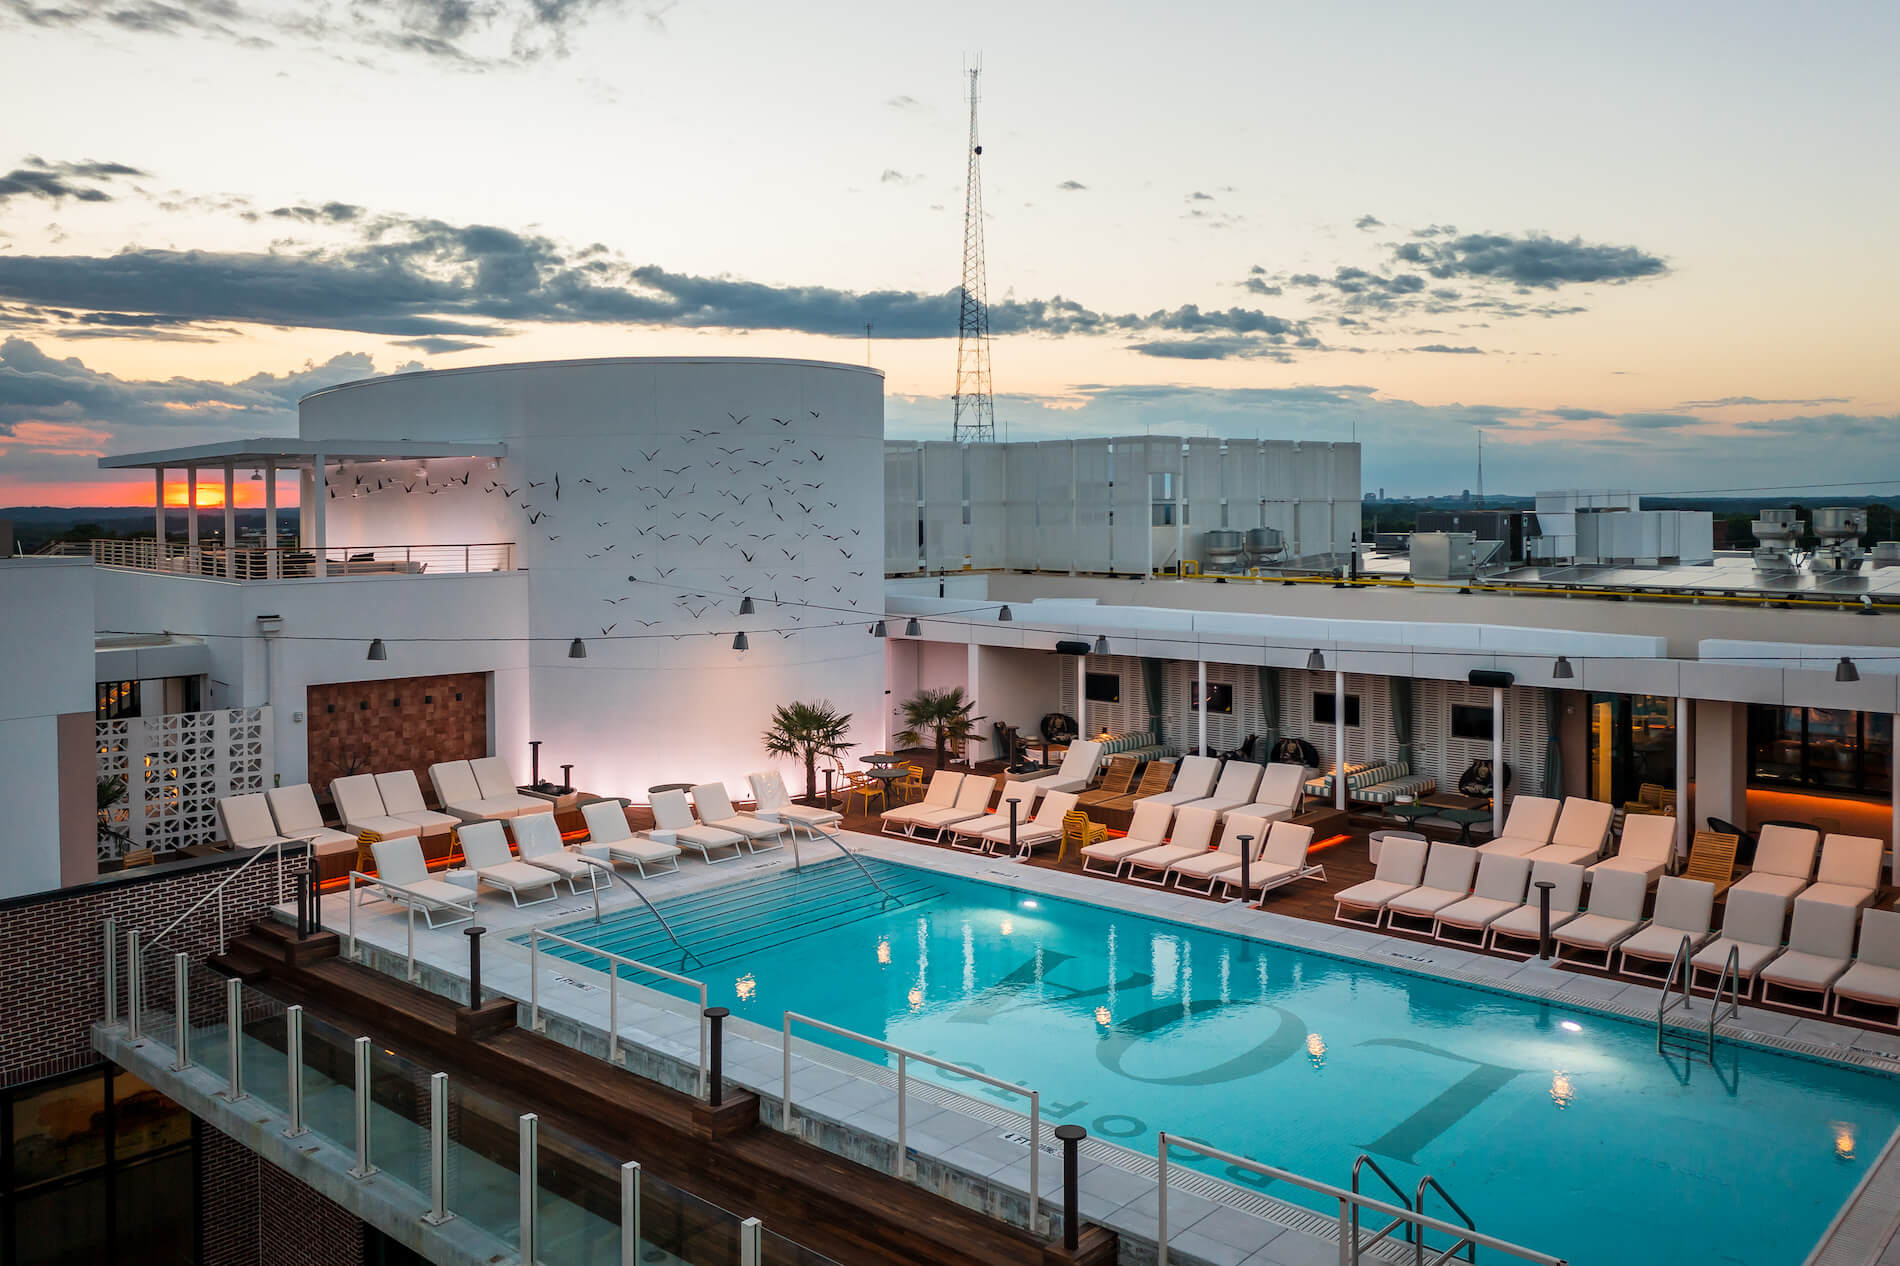 The pool at Rooftop L.O.A.